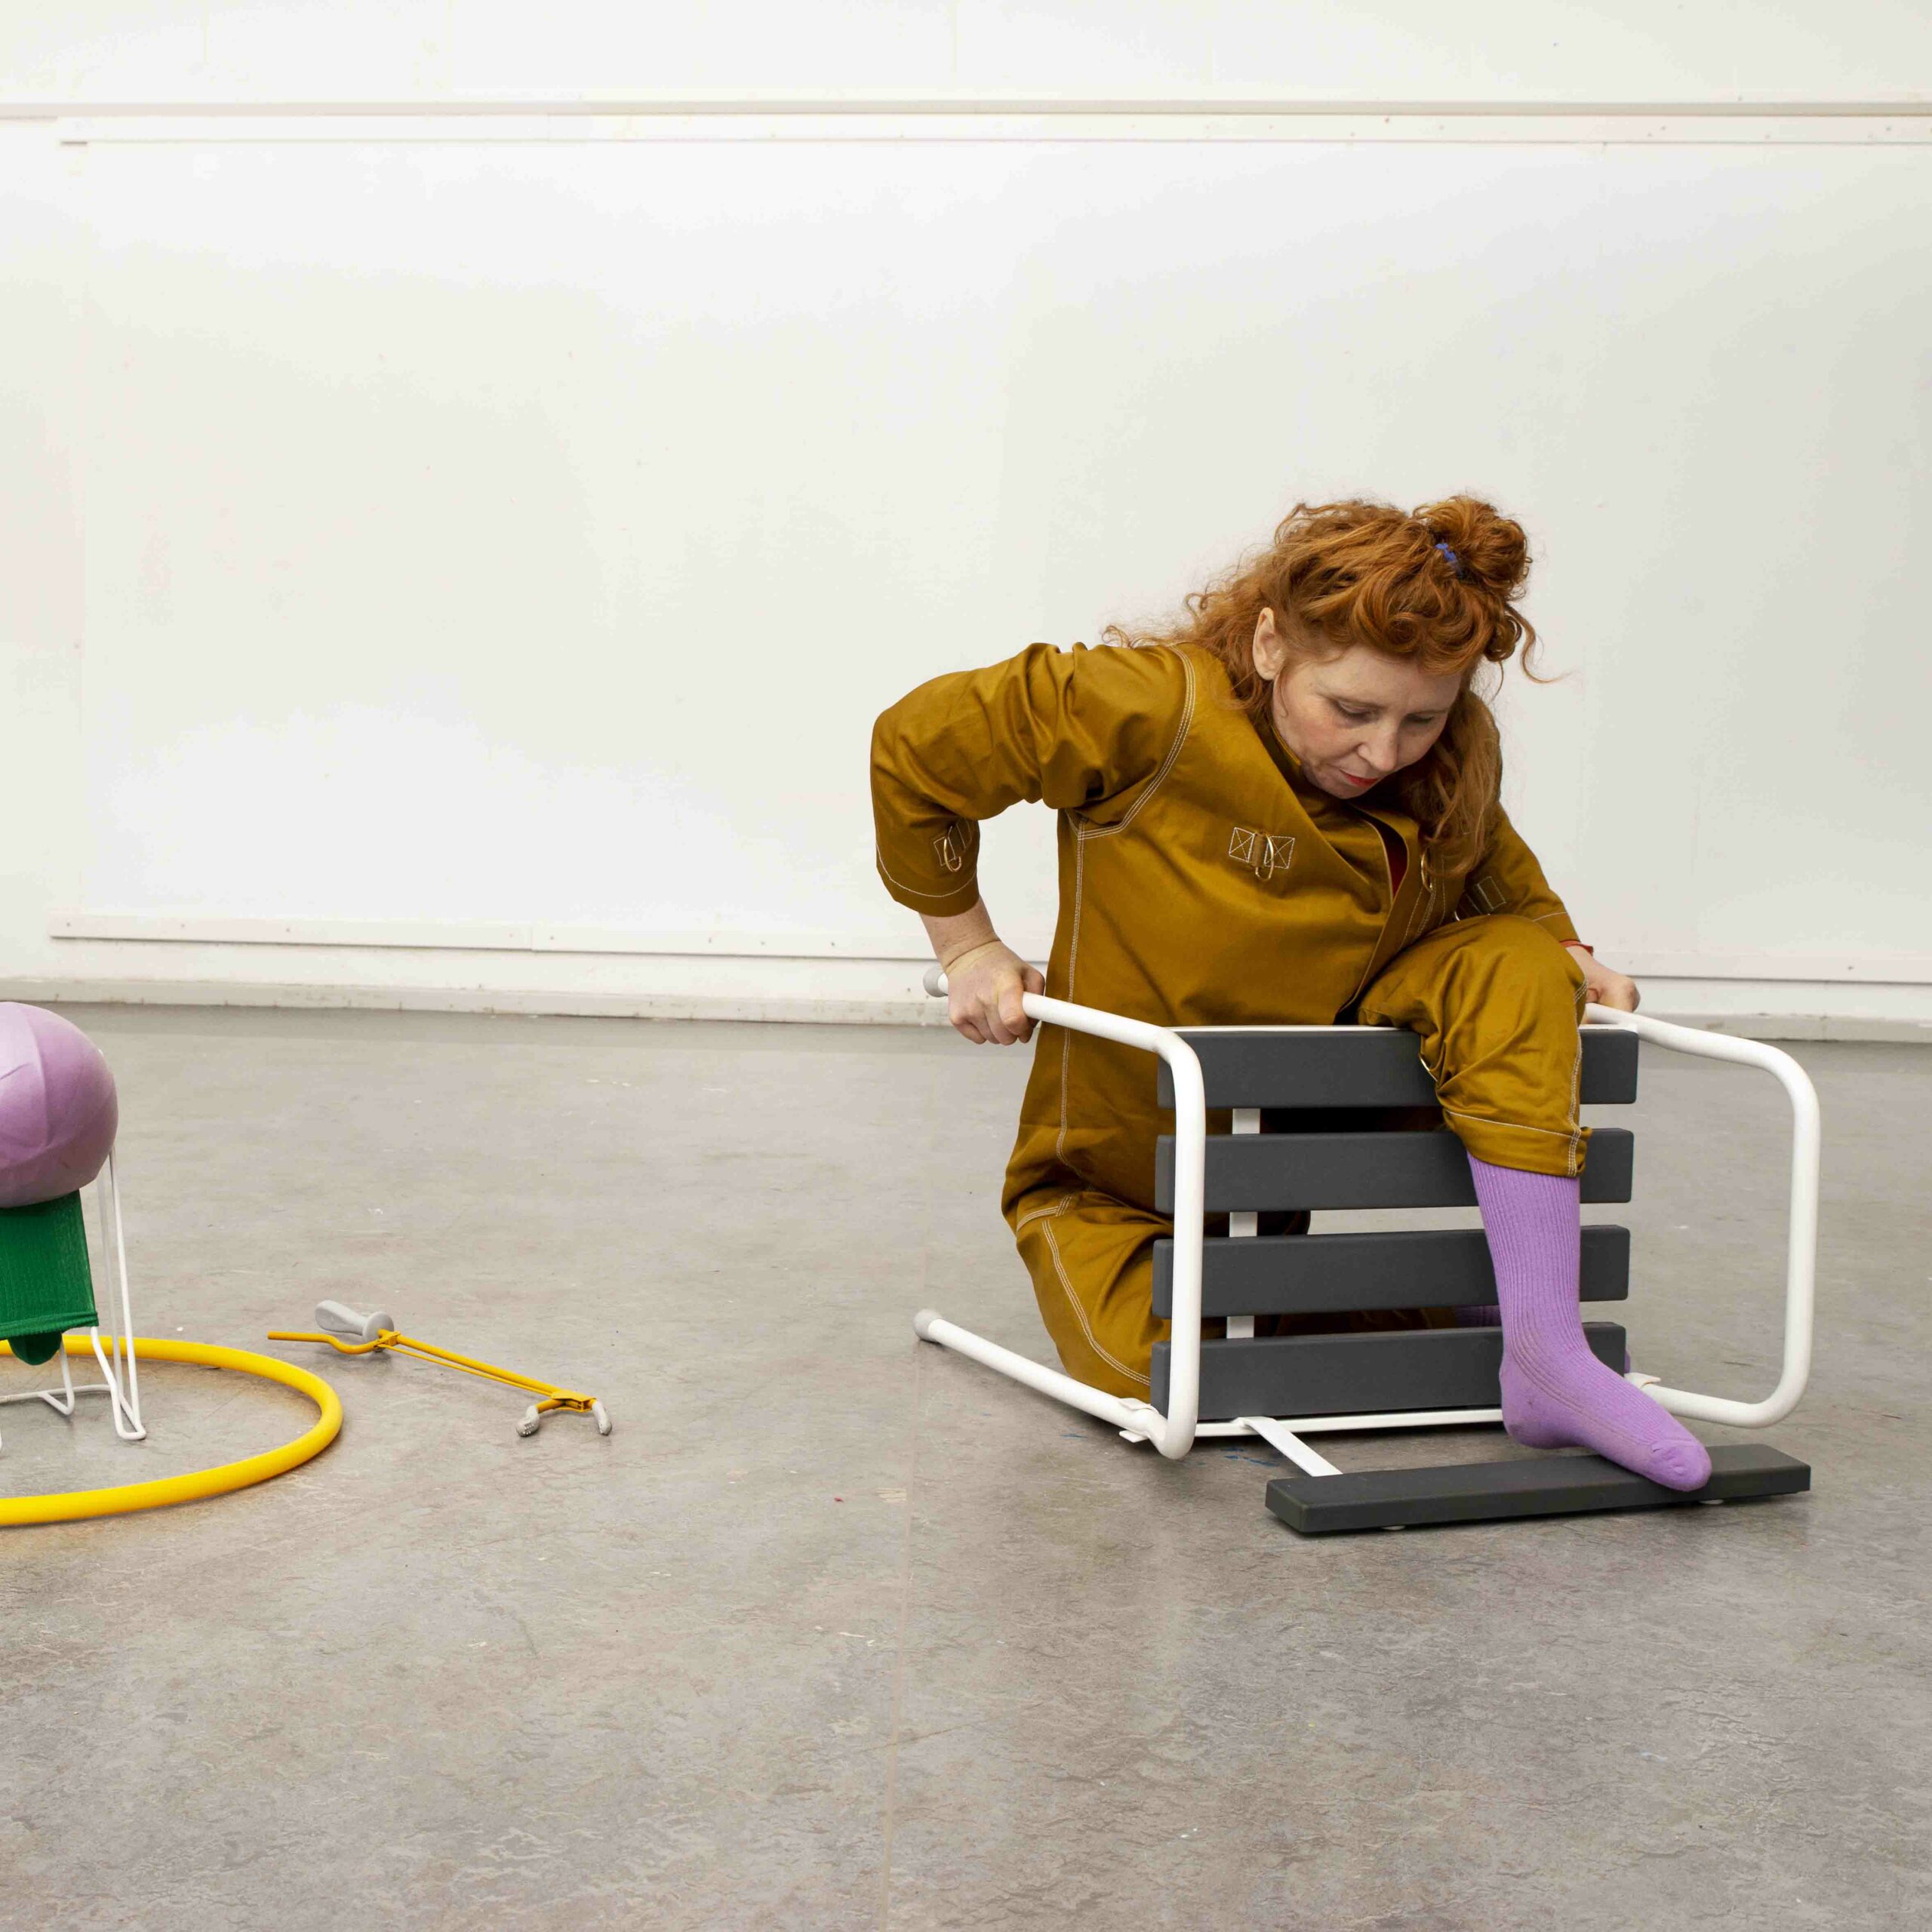 The image depicts a woman wearing a mustard-yellow dress and red hair, trying to climb over a char that been tipped over. To the left we see a yellow hula hoop, a yellow gripper, a purple ball and a green sock. Photo: Lars Dyrendom